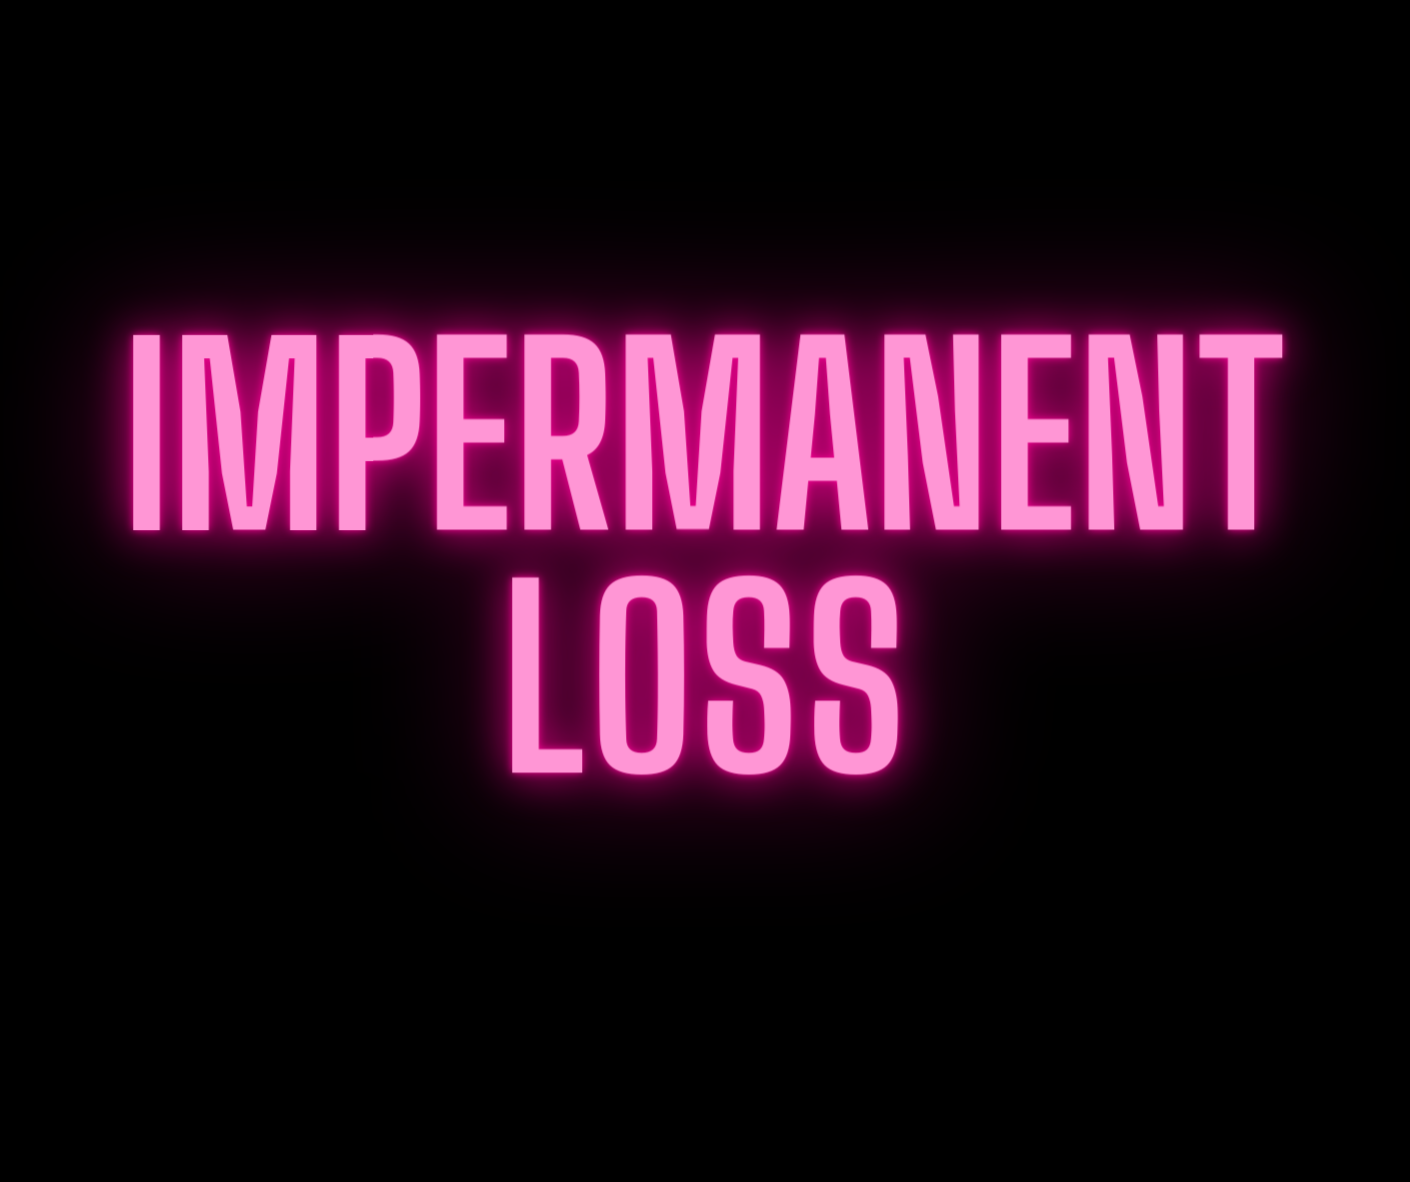 What is Impermanent Loss? And how to avoid it.